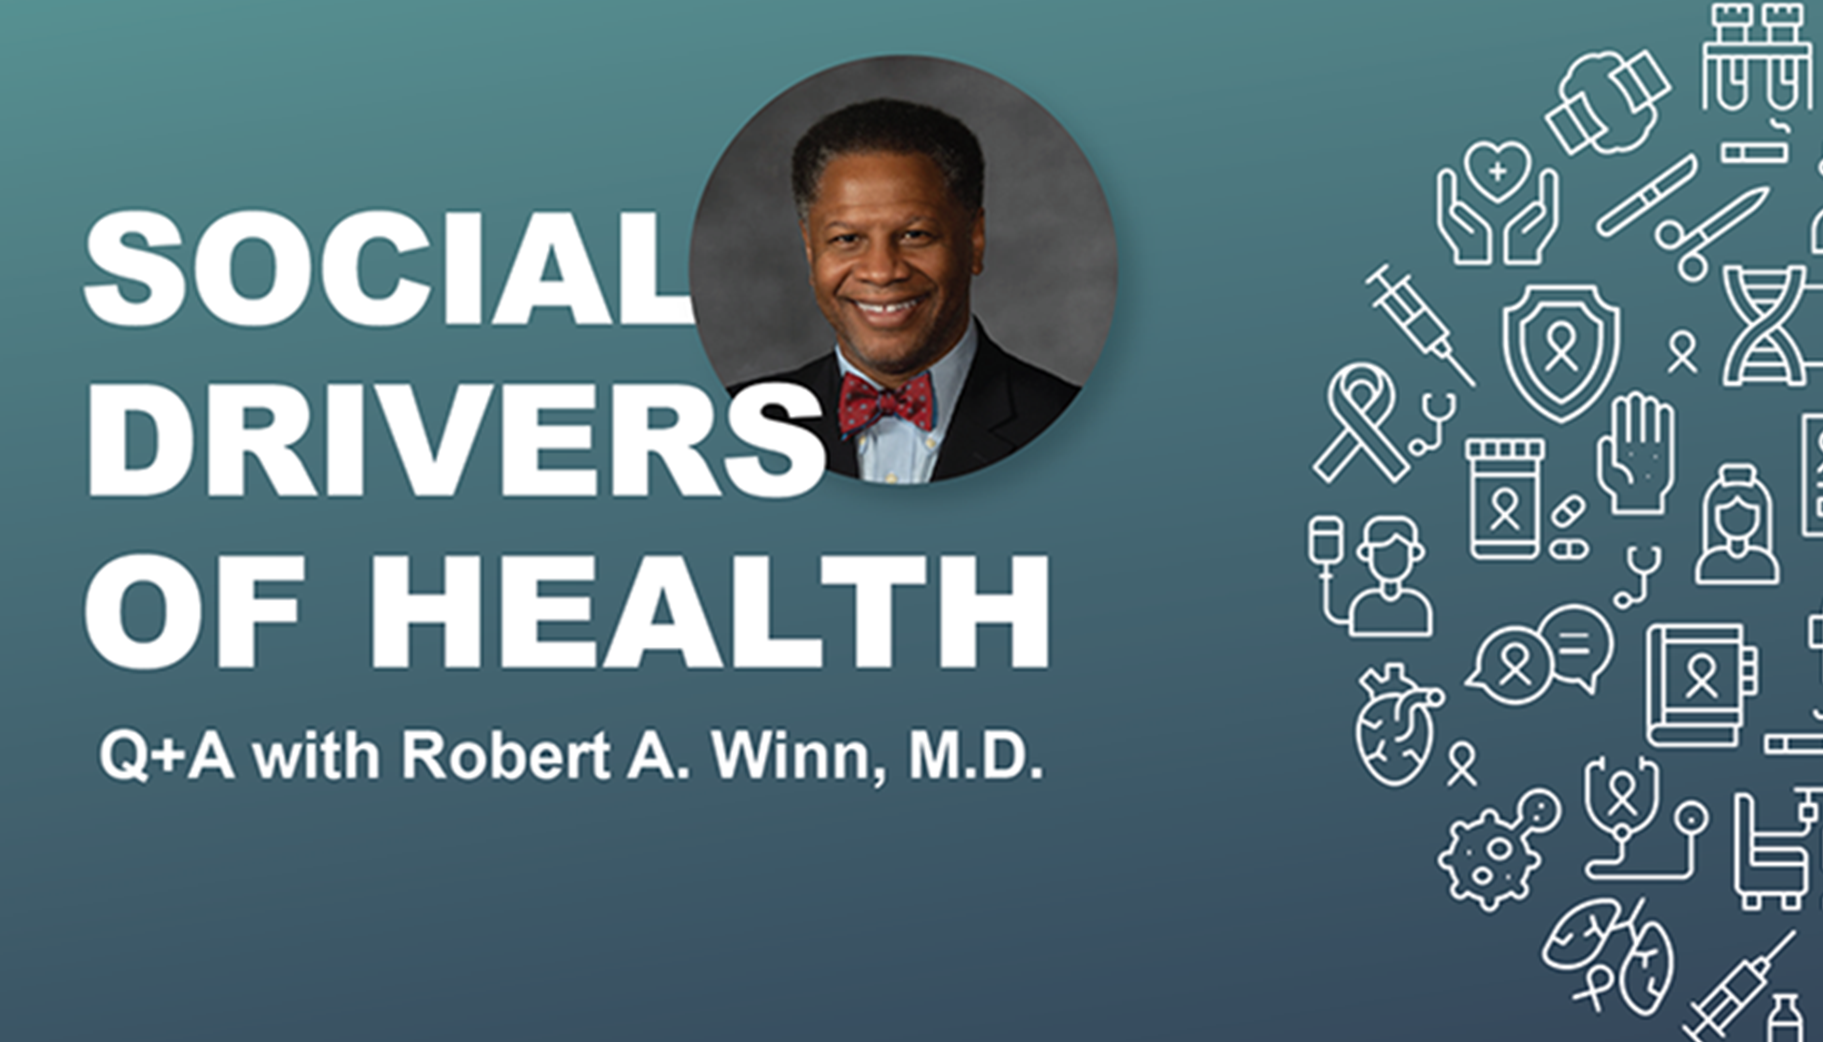 Social drivers of health graphic with headshot of Robert A. Winn, MD